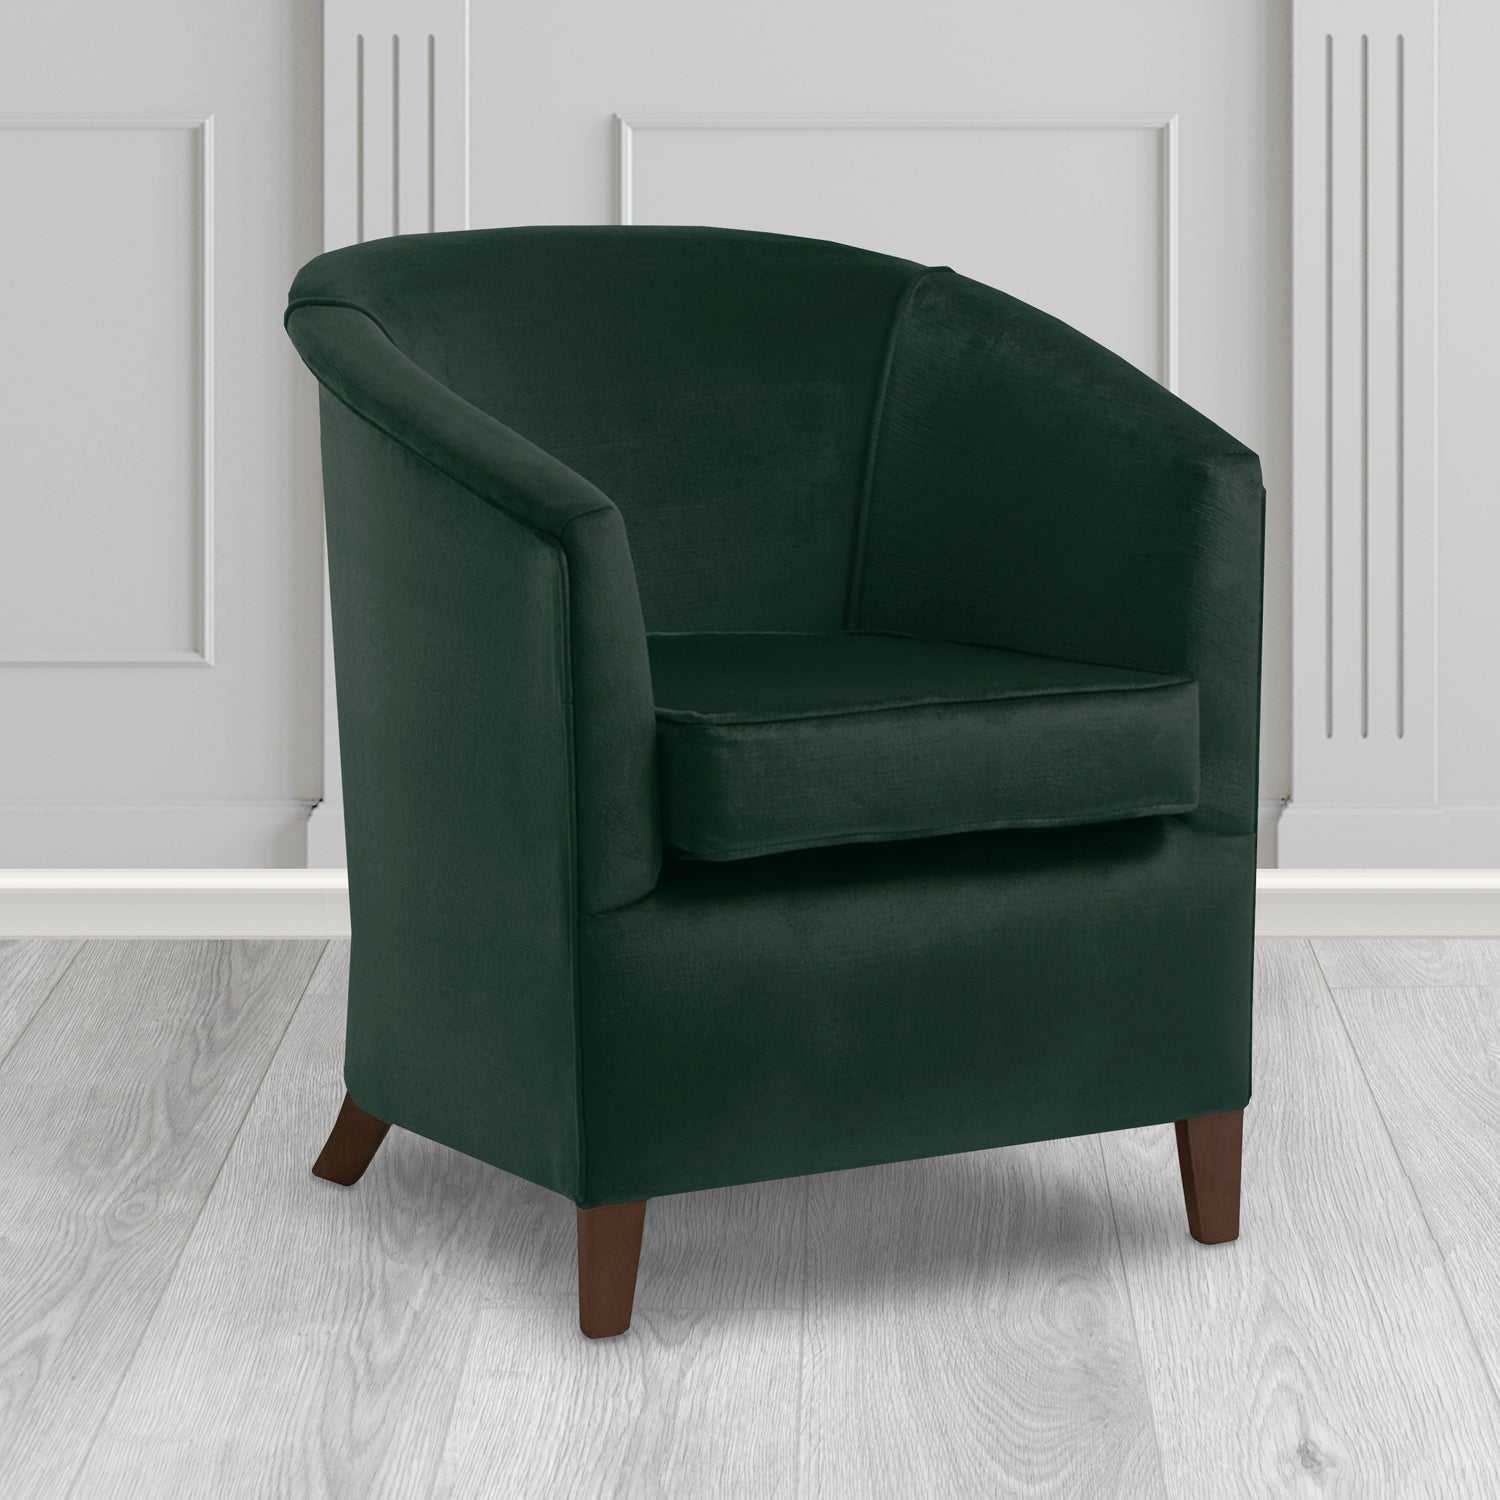 Jasmine Tub Chair in Noble 228 Bottle Green Crib 5 Velvet Fabric - Water Resistant - The Tub Chair Shop